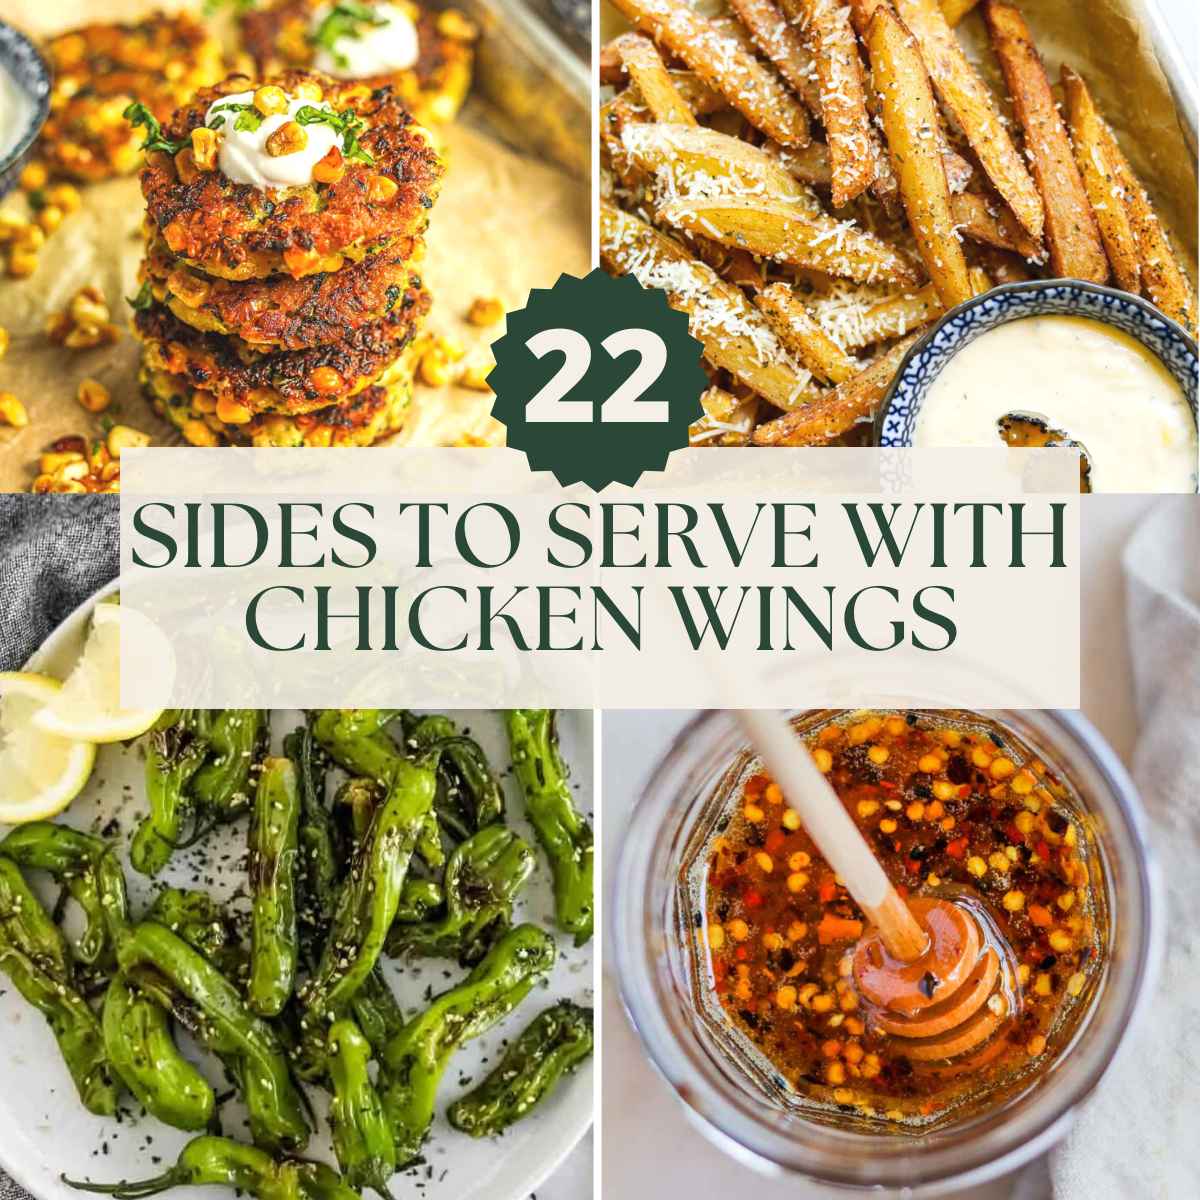 What to serve with chicken wings (22 tasty sides), including corn zucchini fritters, truffles parmesan fries, shishito pepper, and hot honey.